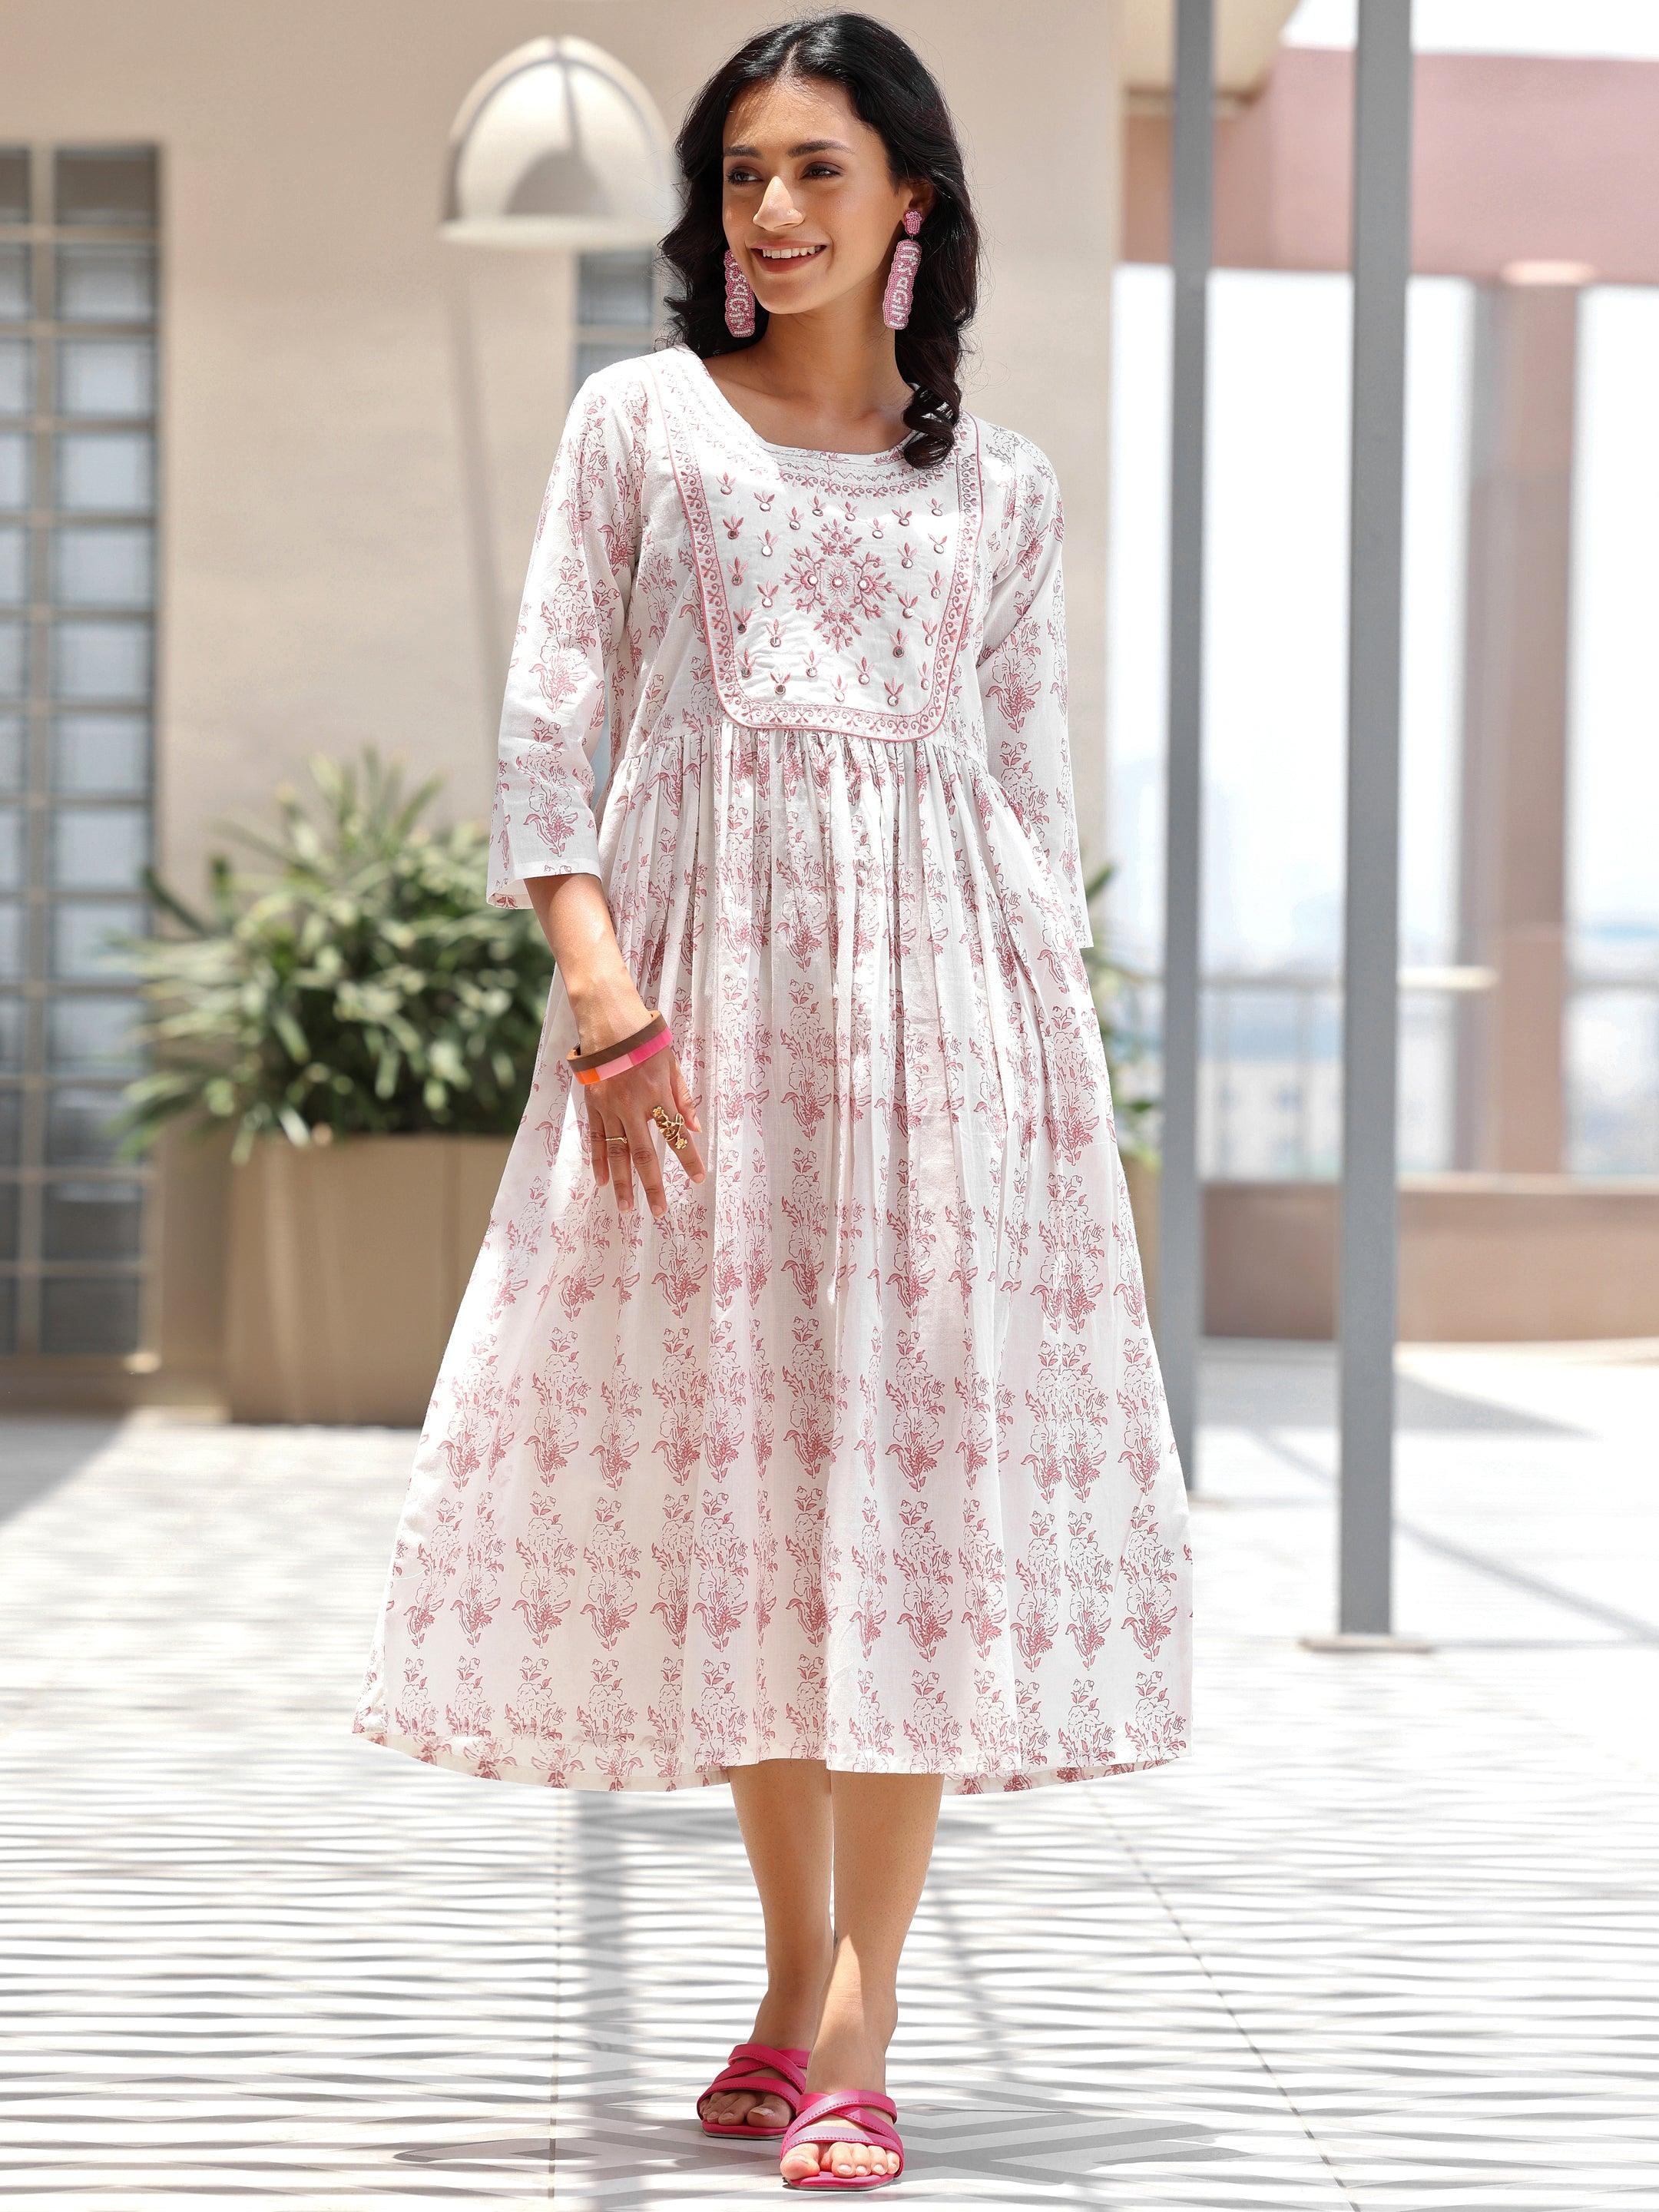 Off White Printed Cotton Fit and Flare Dress